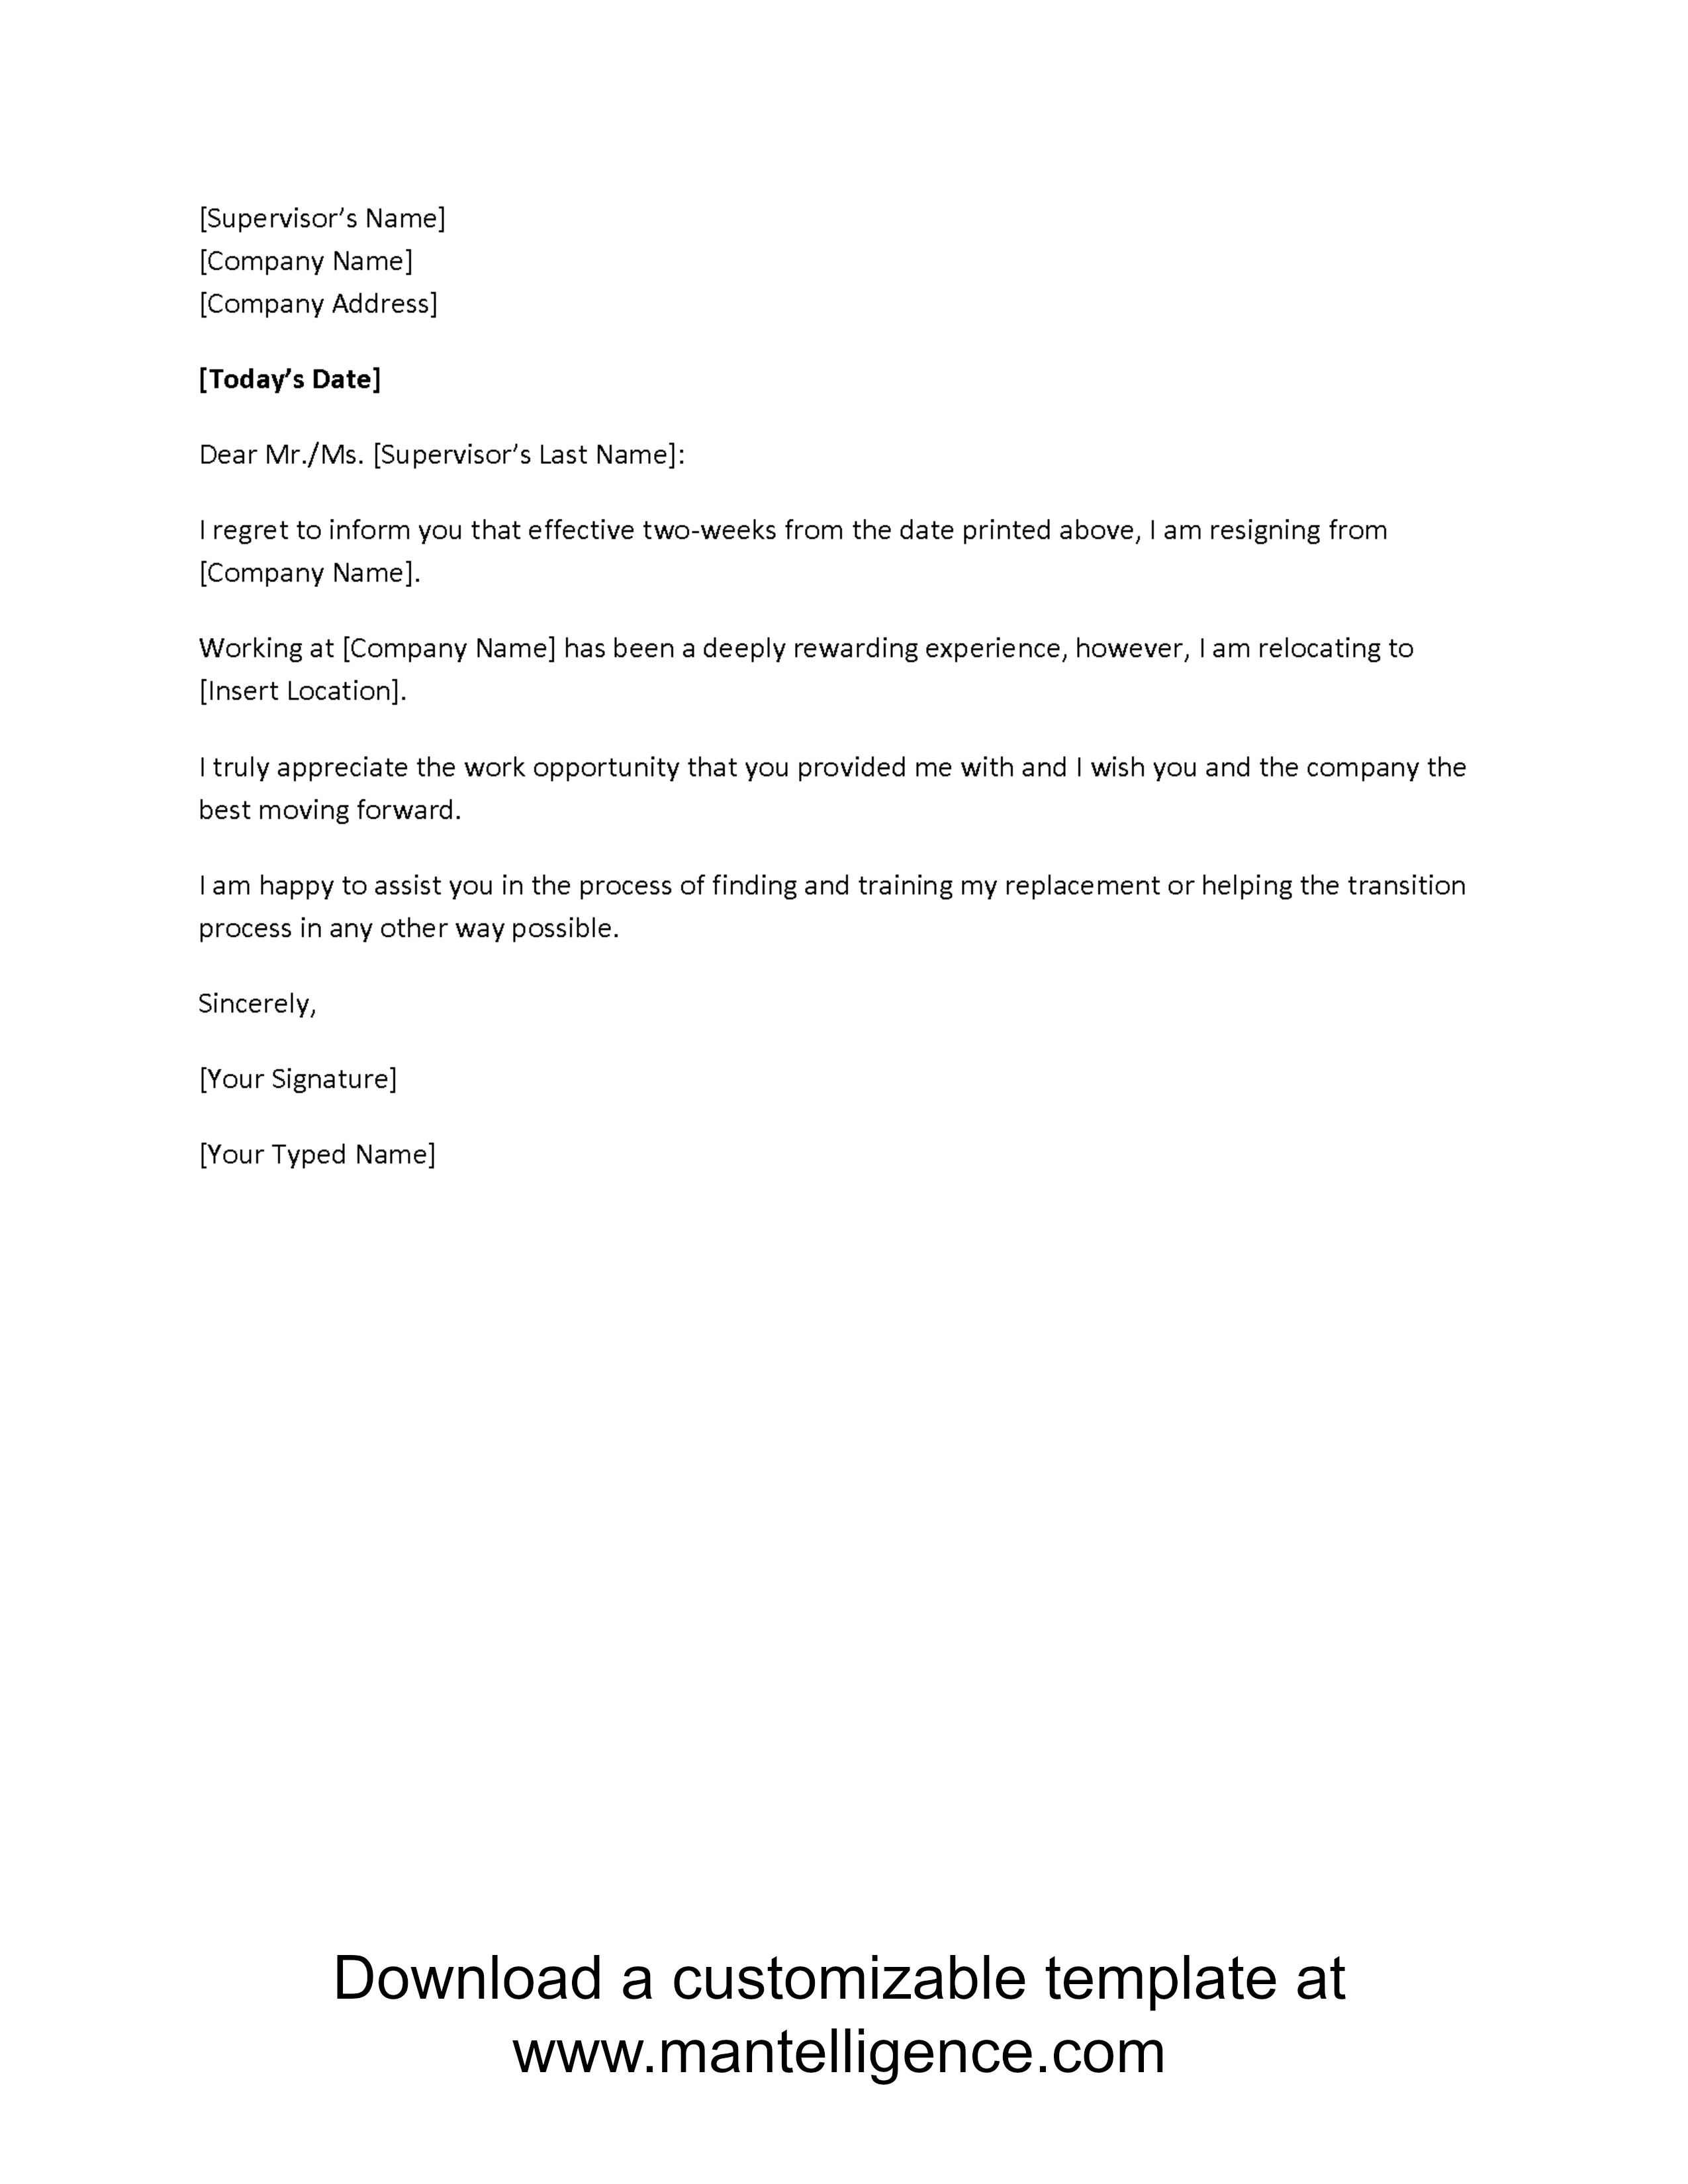 Judgement Proof Letter Template - 3 Highly Professional Two Weeks Notice Letter Templates